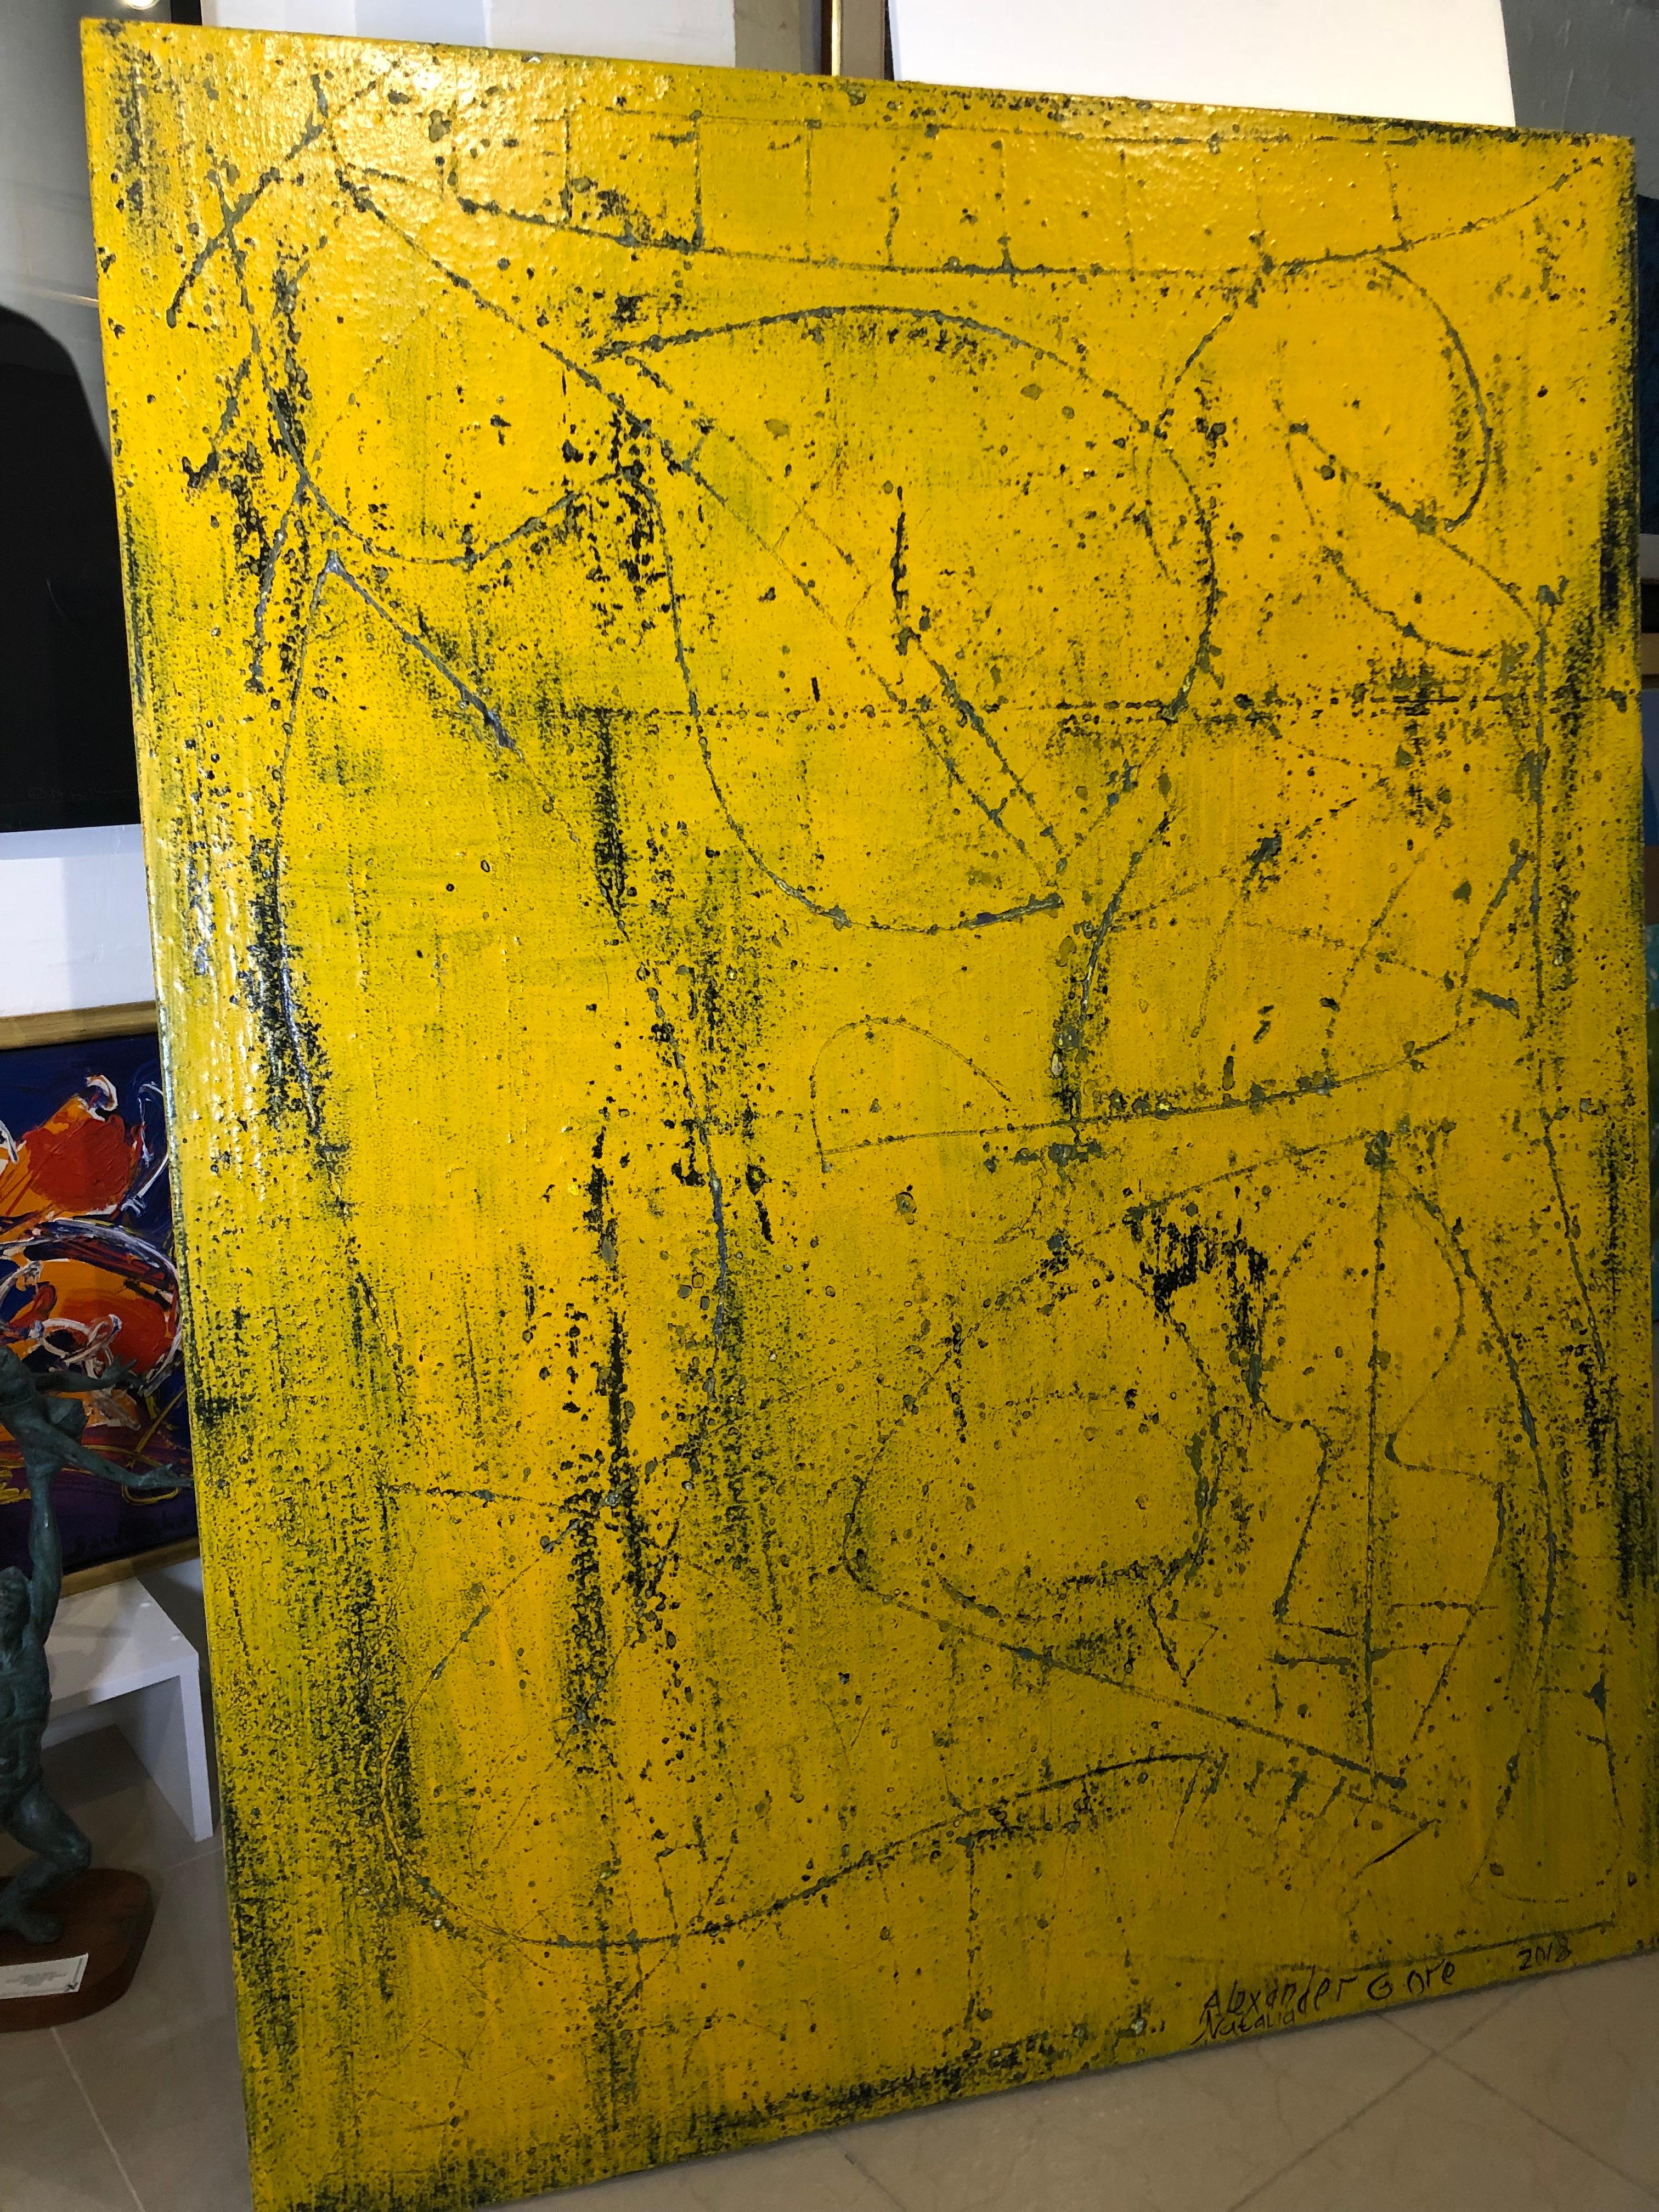 Tracks of the Future Contemporary Yellow Gray Abstract
Natural pigment on Belgian Linen canvas, varnish.
This painting by Alexander and Natalia Gore husband and wife both born in St. Petersburg Russia in 1958 and later emigrated to the USA.